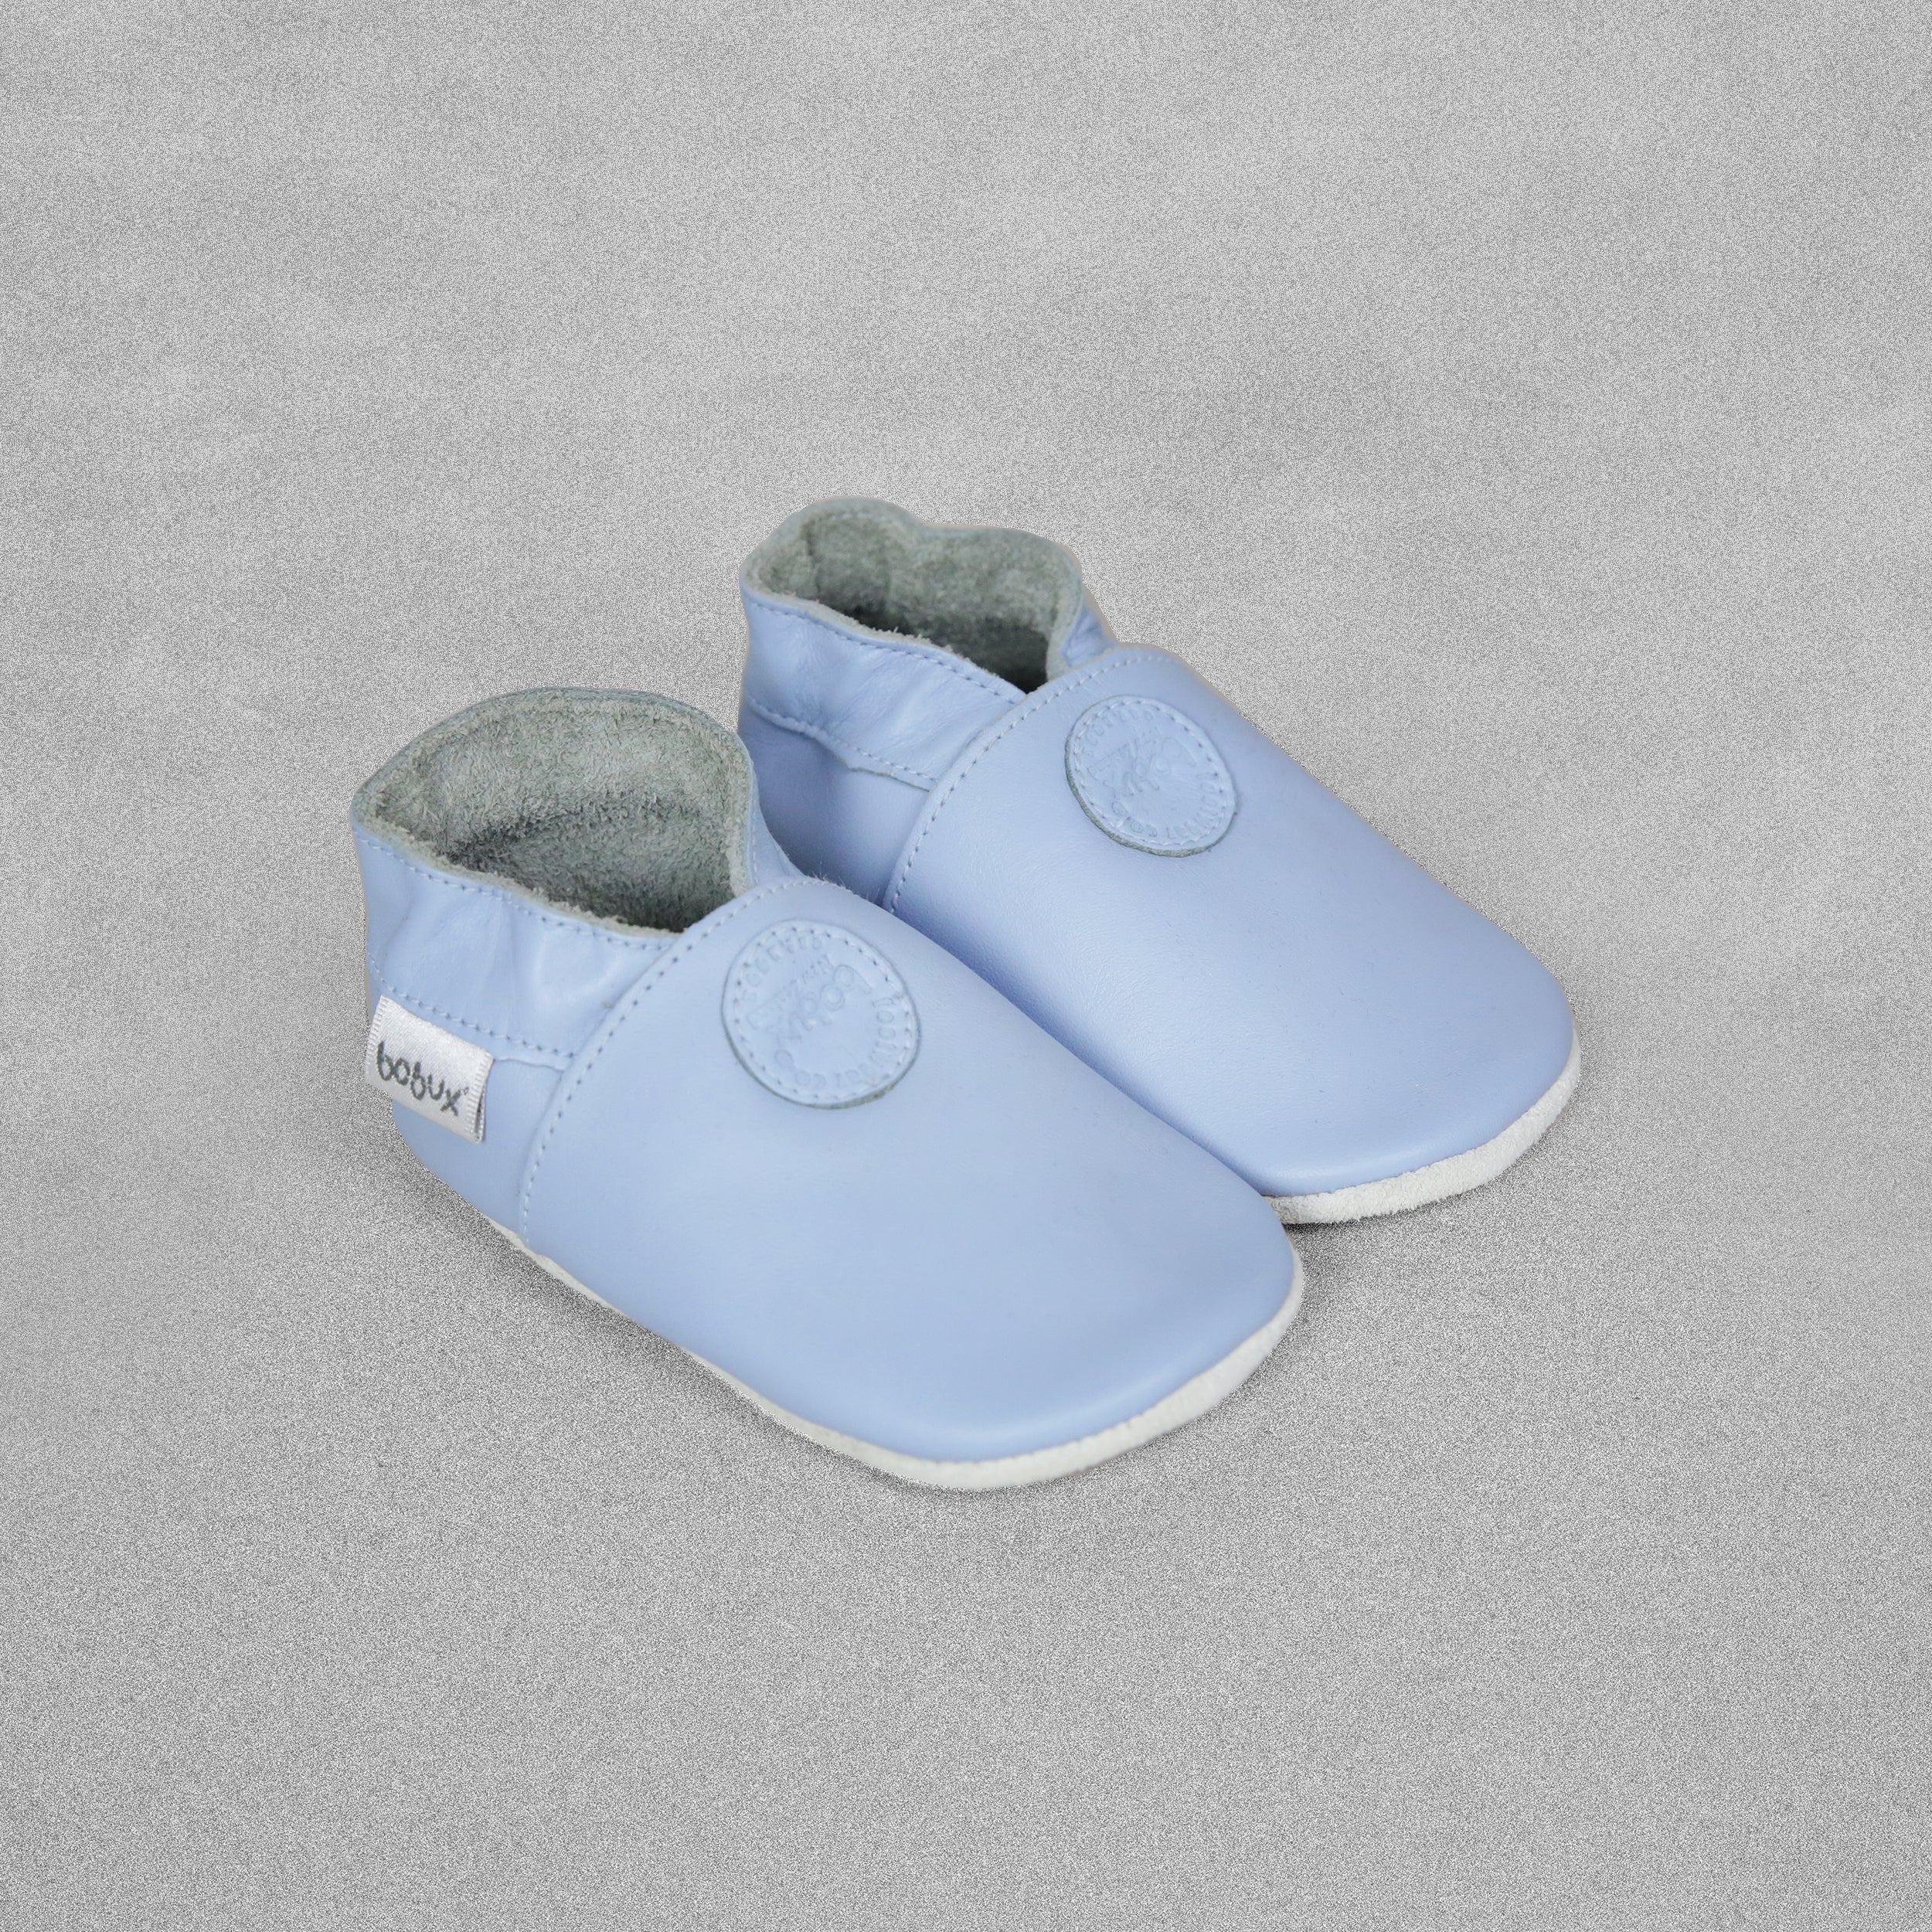 Bobux Soft Sole Baby Shoe 'Baby Blue' - Small /3-9 Months